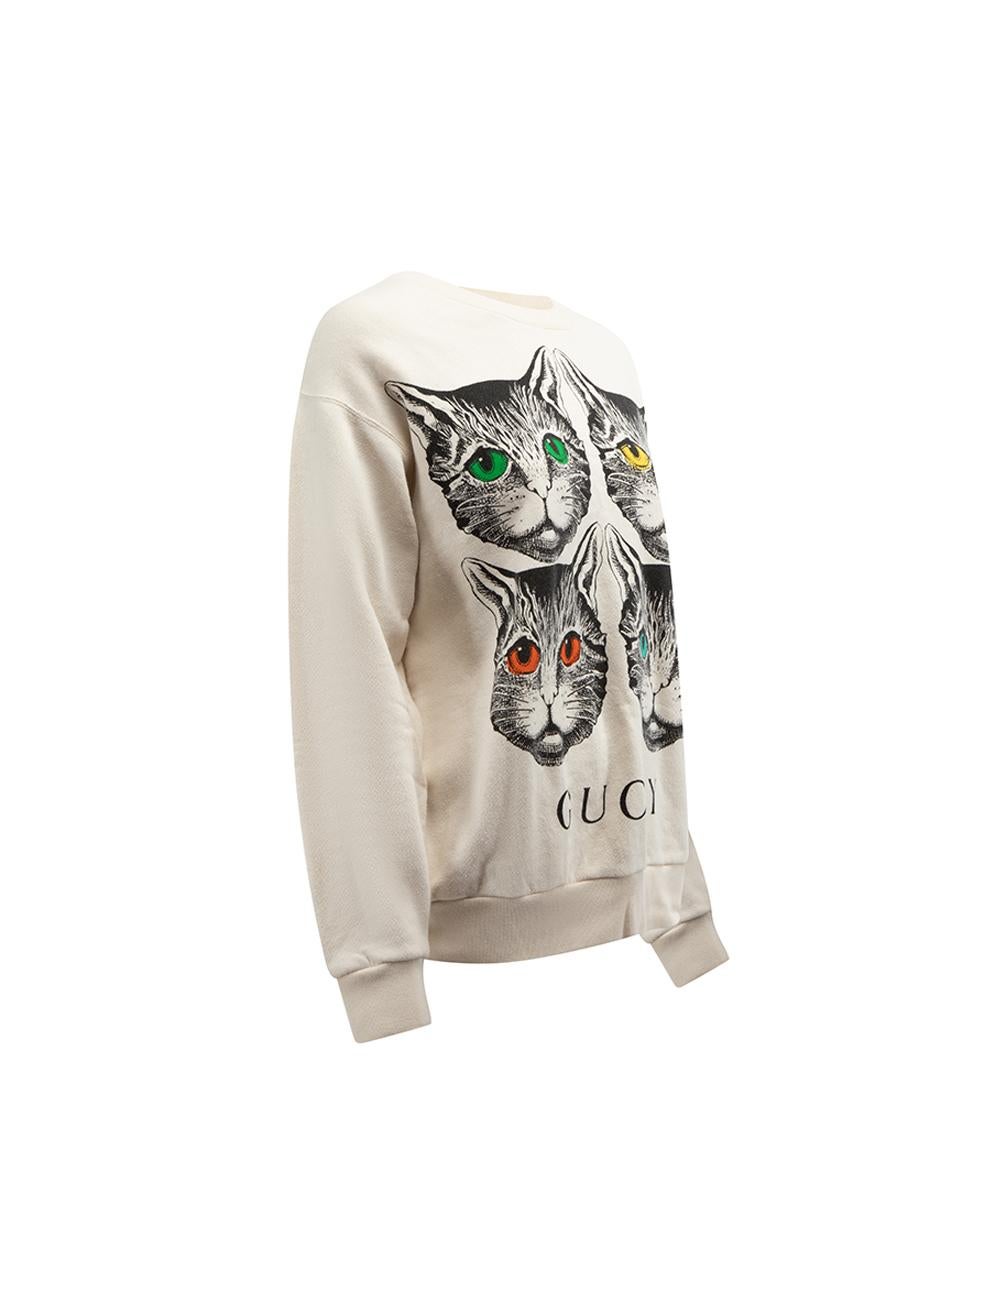 CONDITION is Very good. Hardly any visible wear to sweatshirt is evident on this used Gucci designer resale item.



Details


Cream 

Cotton

Oversized jumper 

Loose fit 

Long sleeve

Round collar 

Printed pattern 

Slip on fastening  





Made